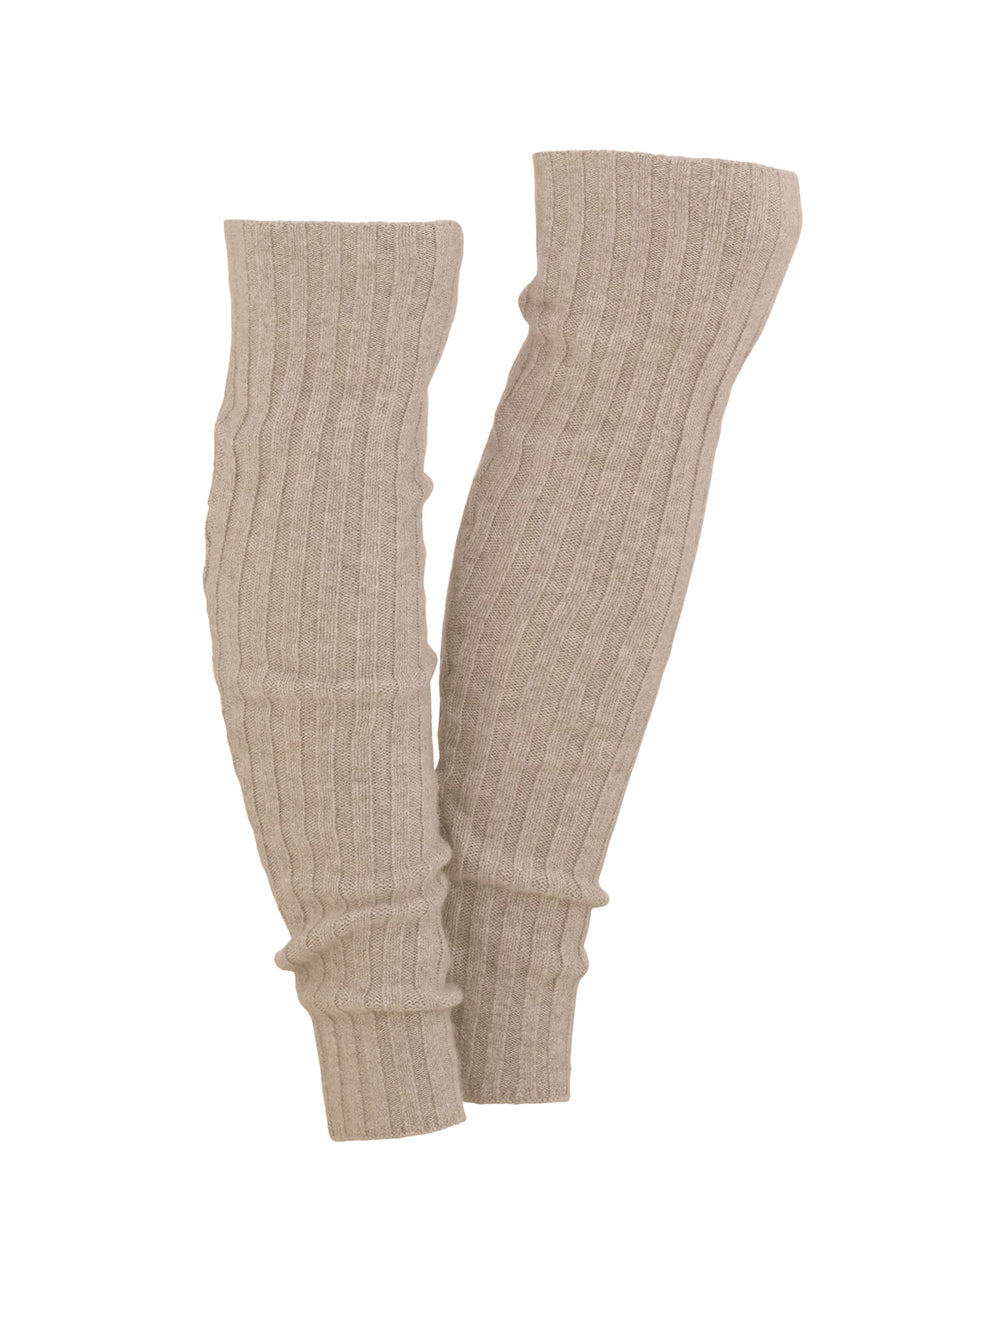 leg warmers in 100% cashmere by Kashmina